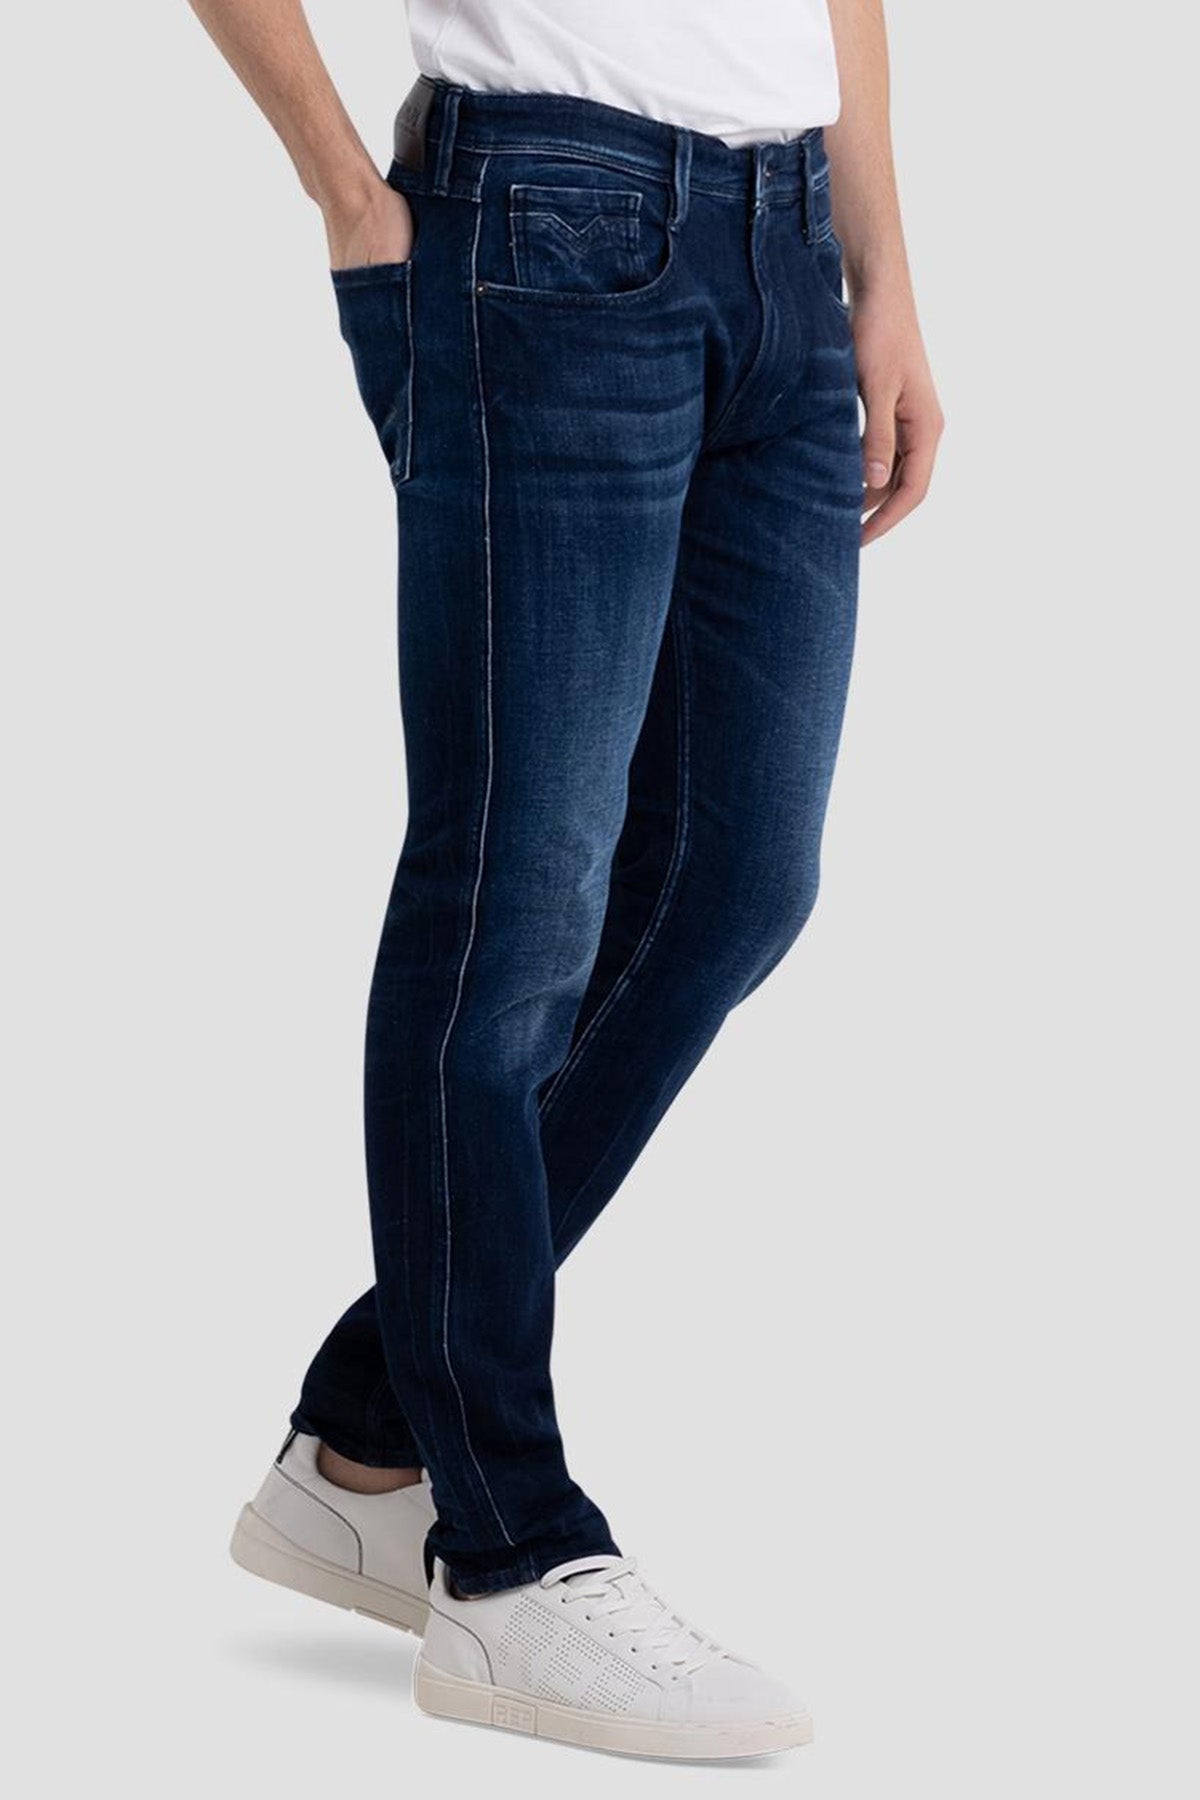 Replay Anbass Extra Light Slim Fit Jeans-Libas Trendy Fashion Store